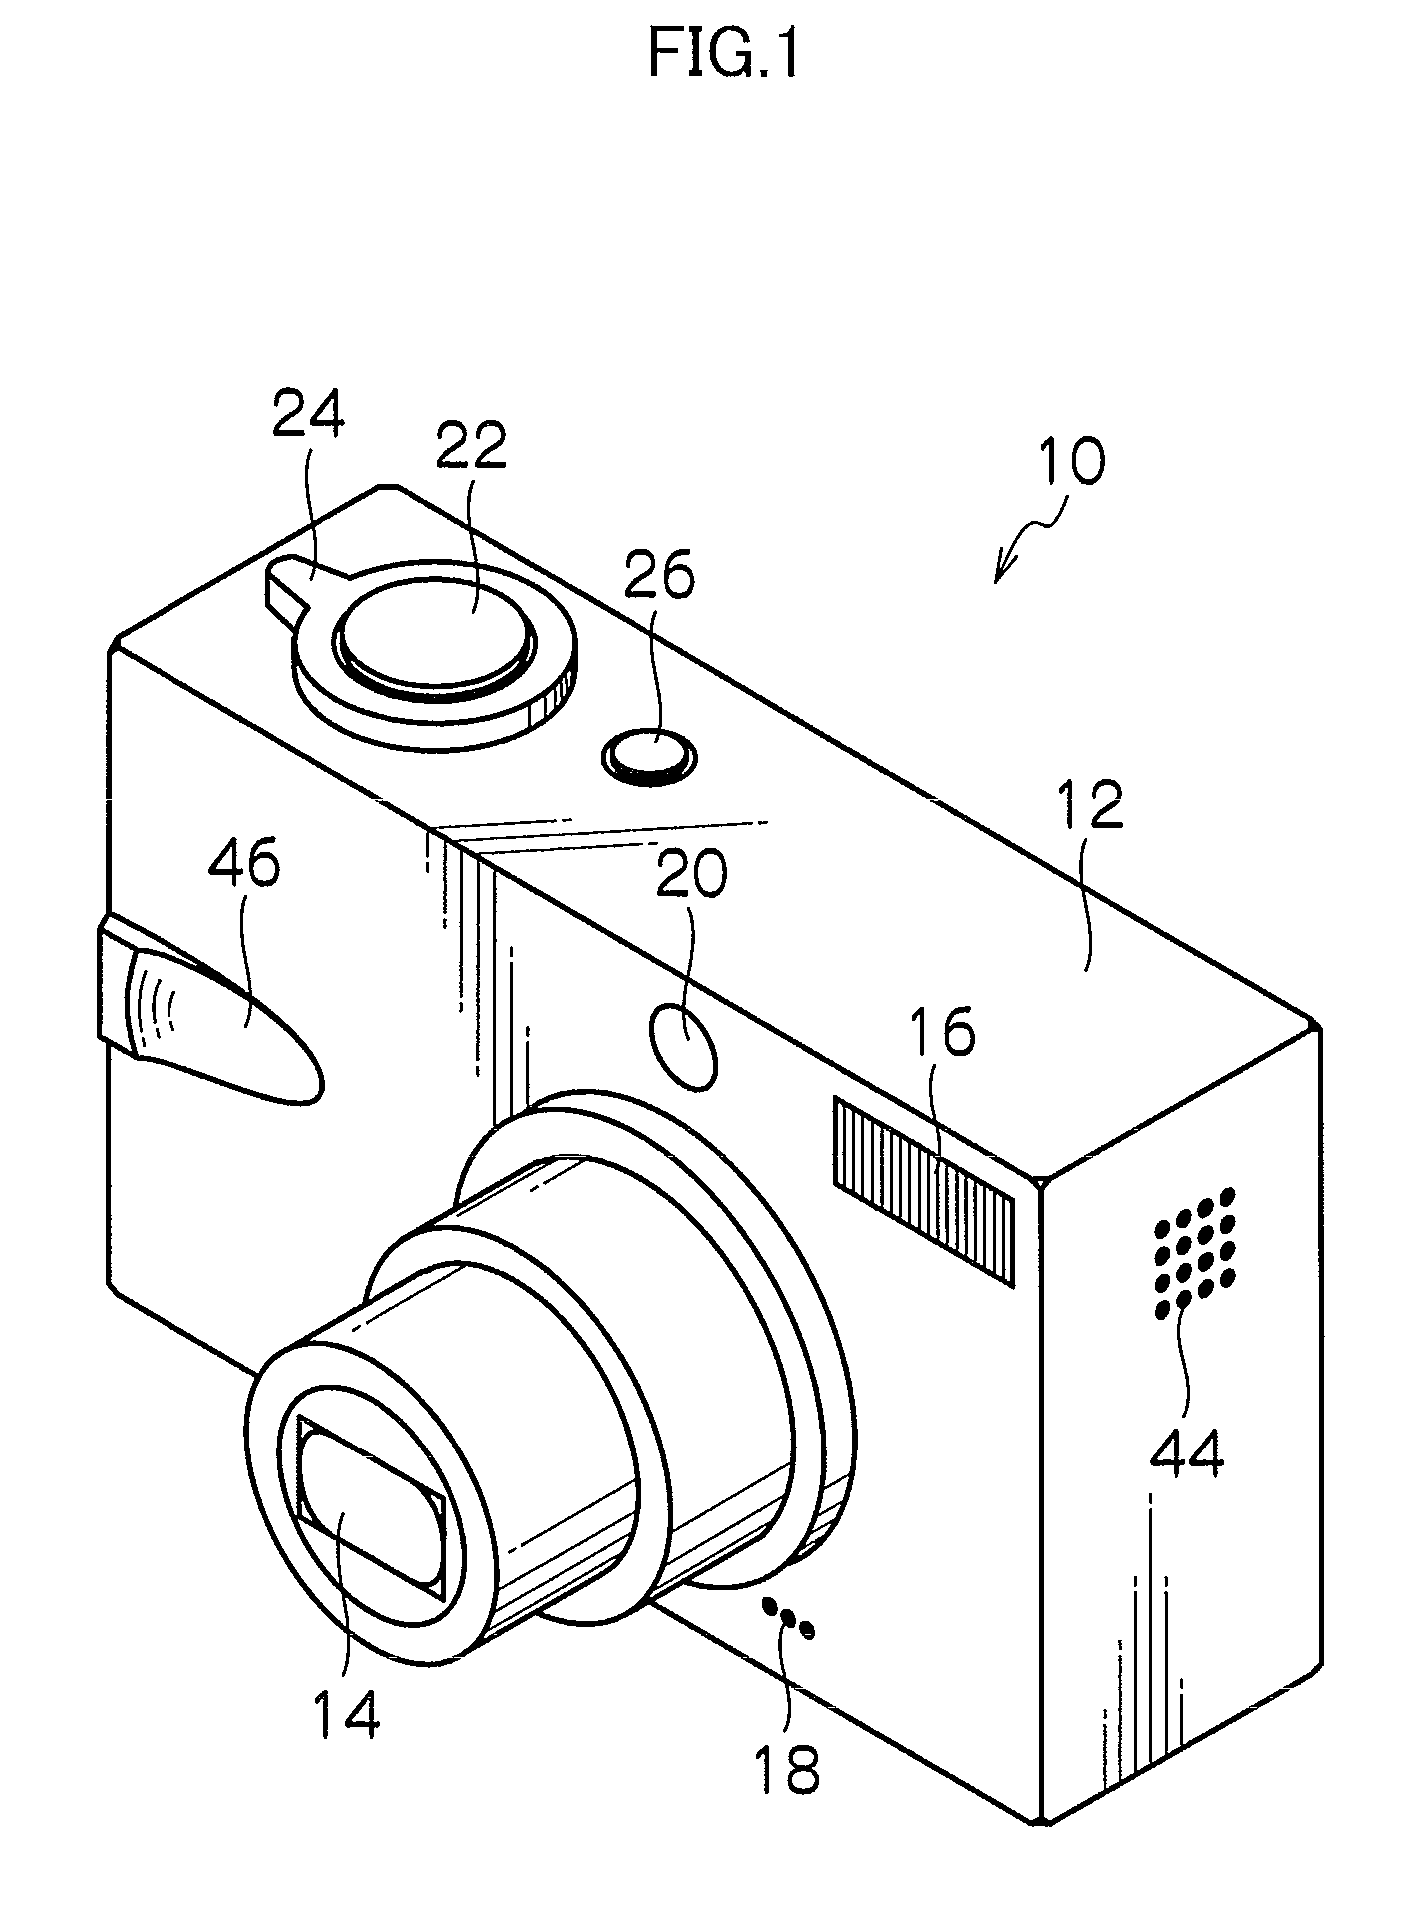 Photographing apparatus and method